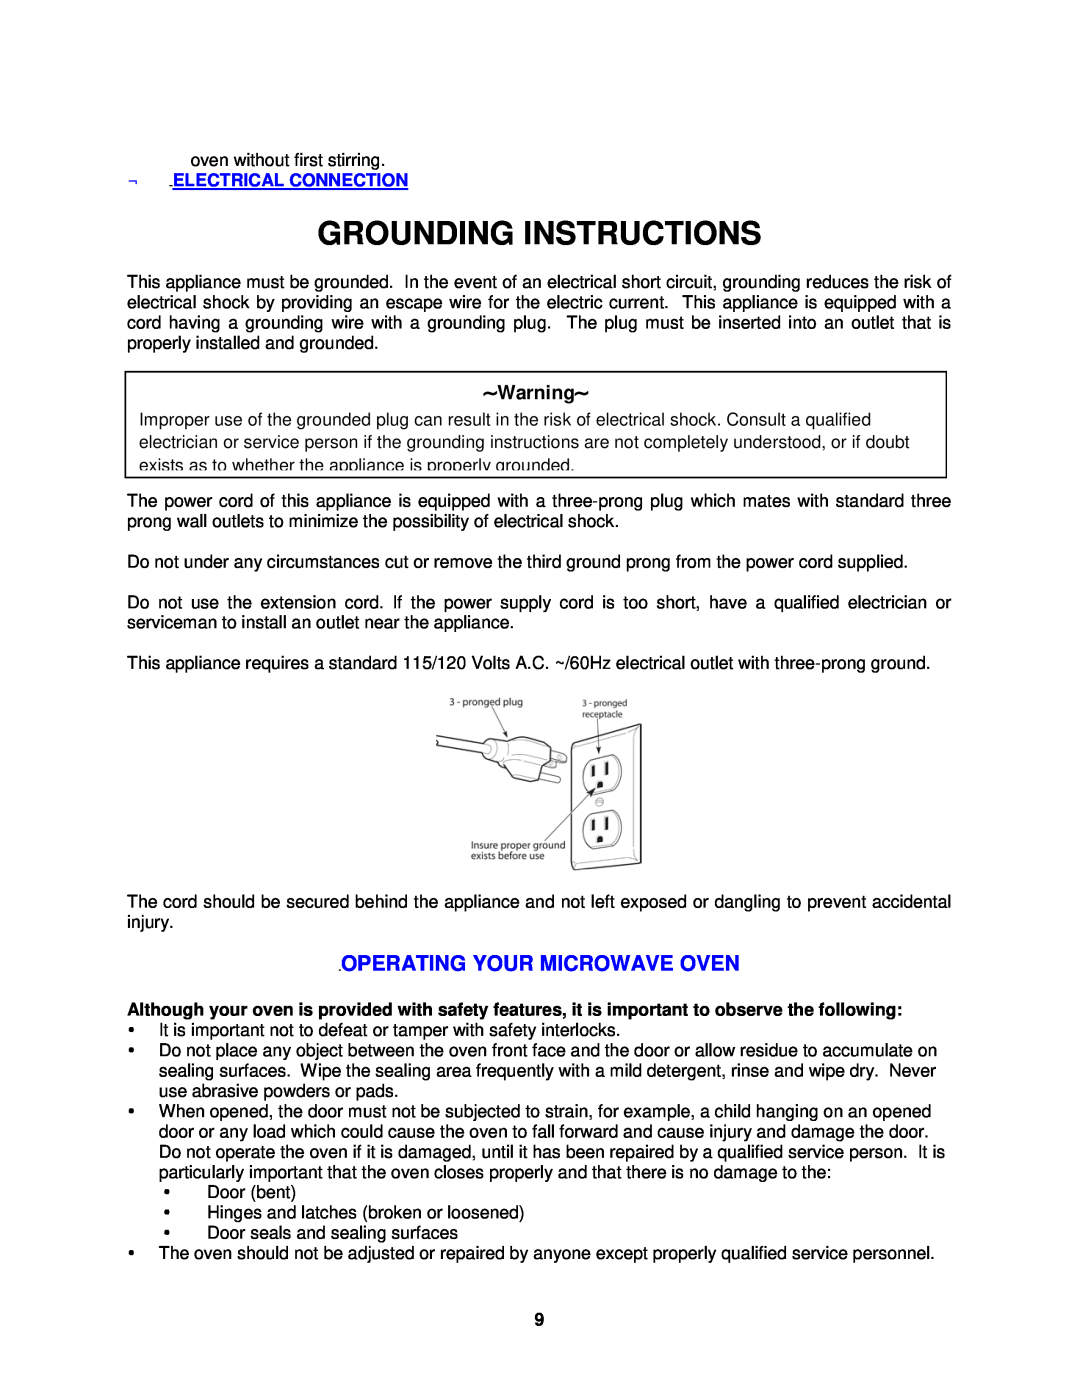 Avanti MO1250TW, M01250TW Grounding Instructions, Operating Your Microwave Oven, ∼Warning∼, ←Electrical Connection 